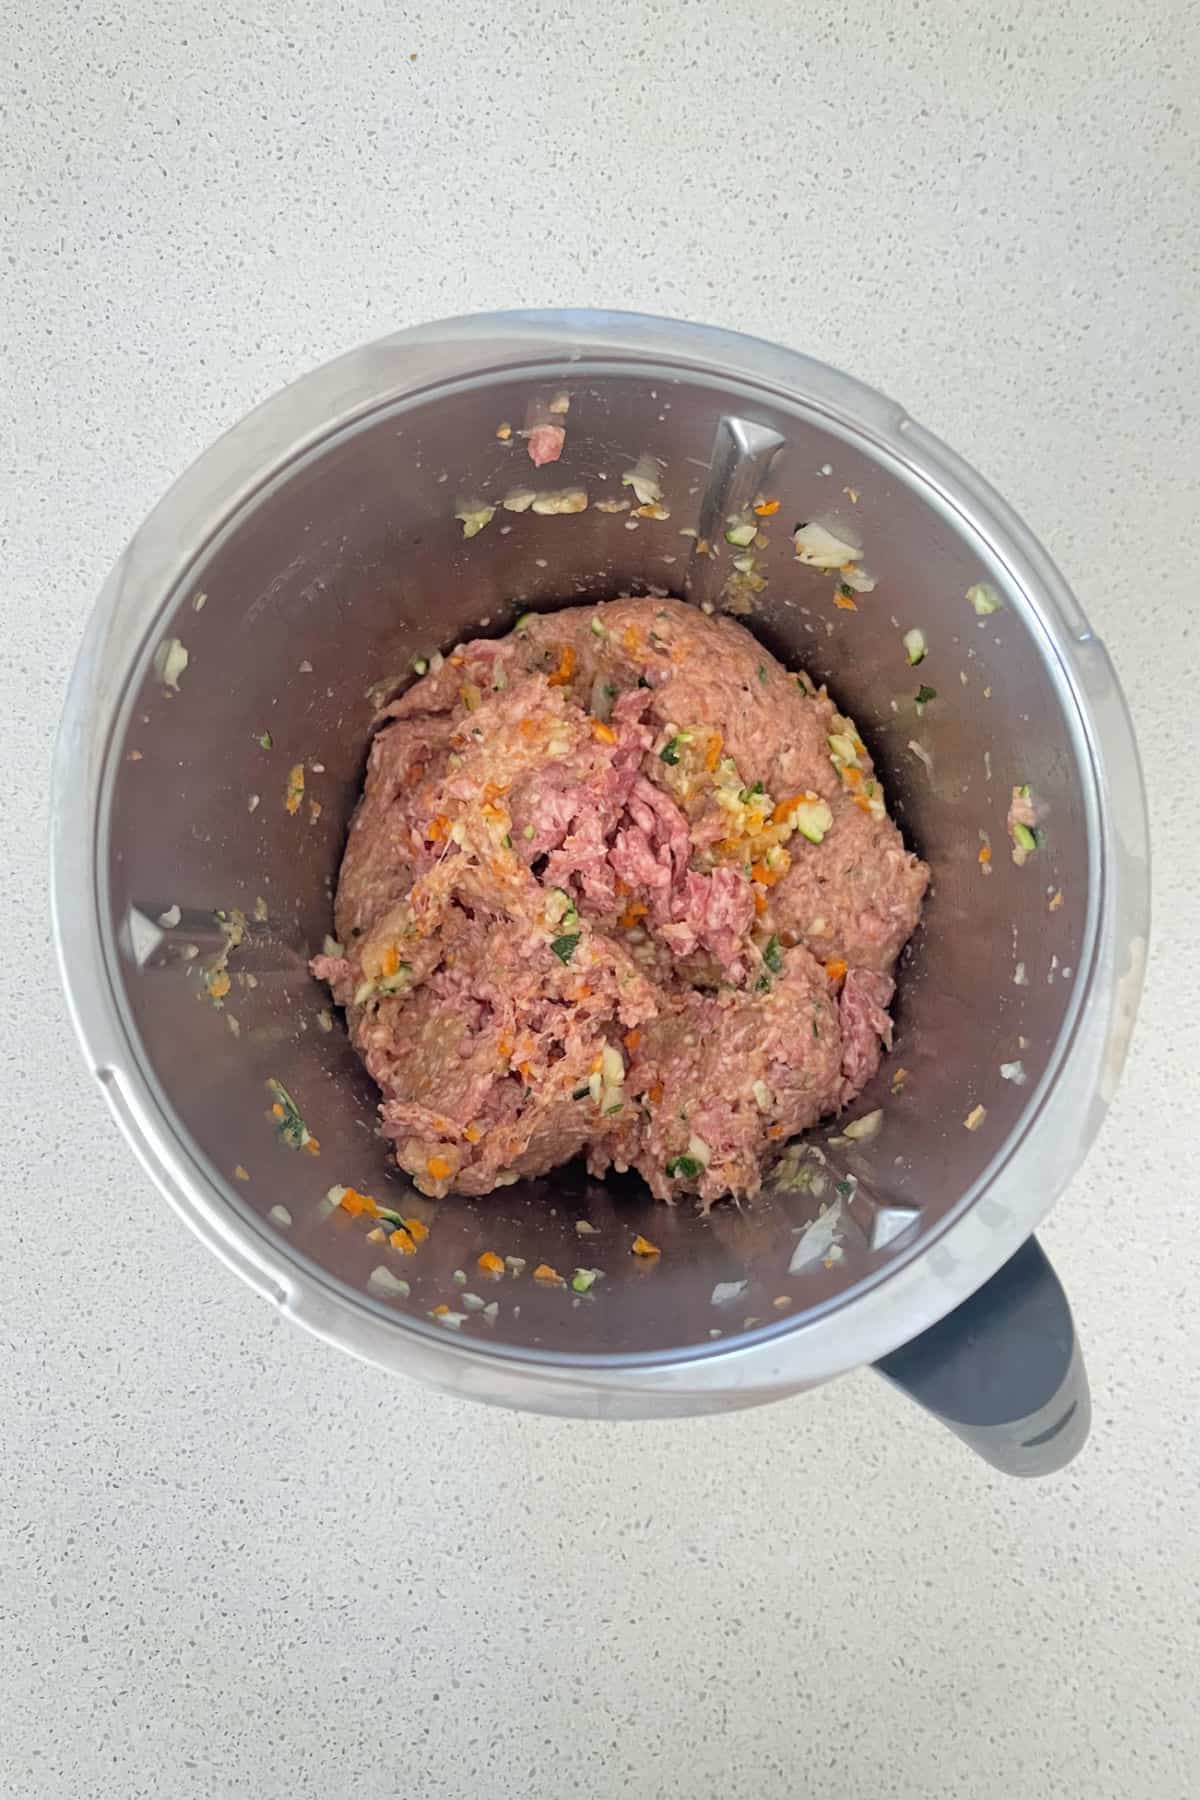 Beef Rissole Ingredients mixed together in a thermomix bowl.